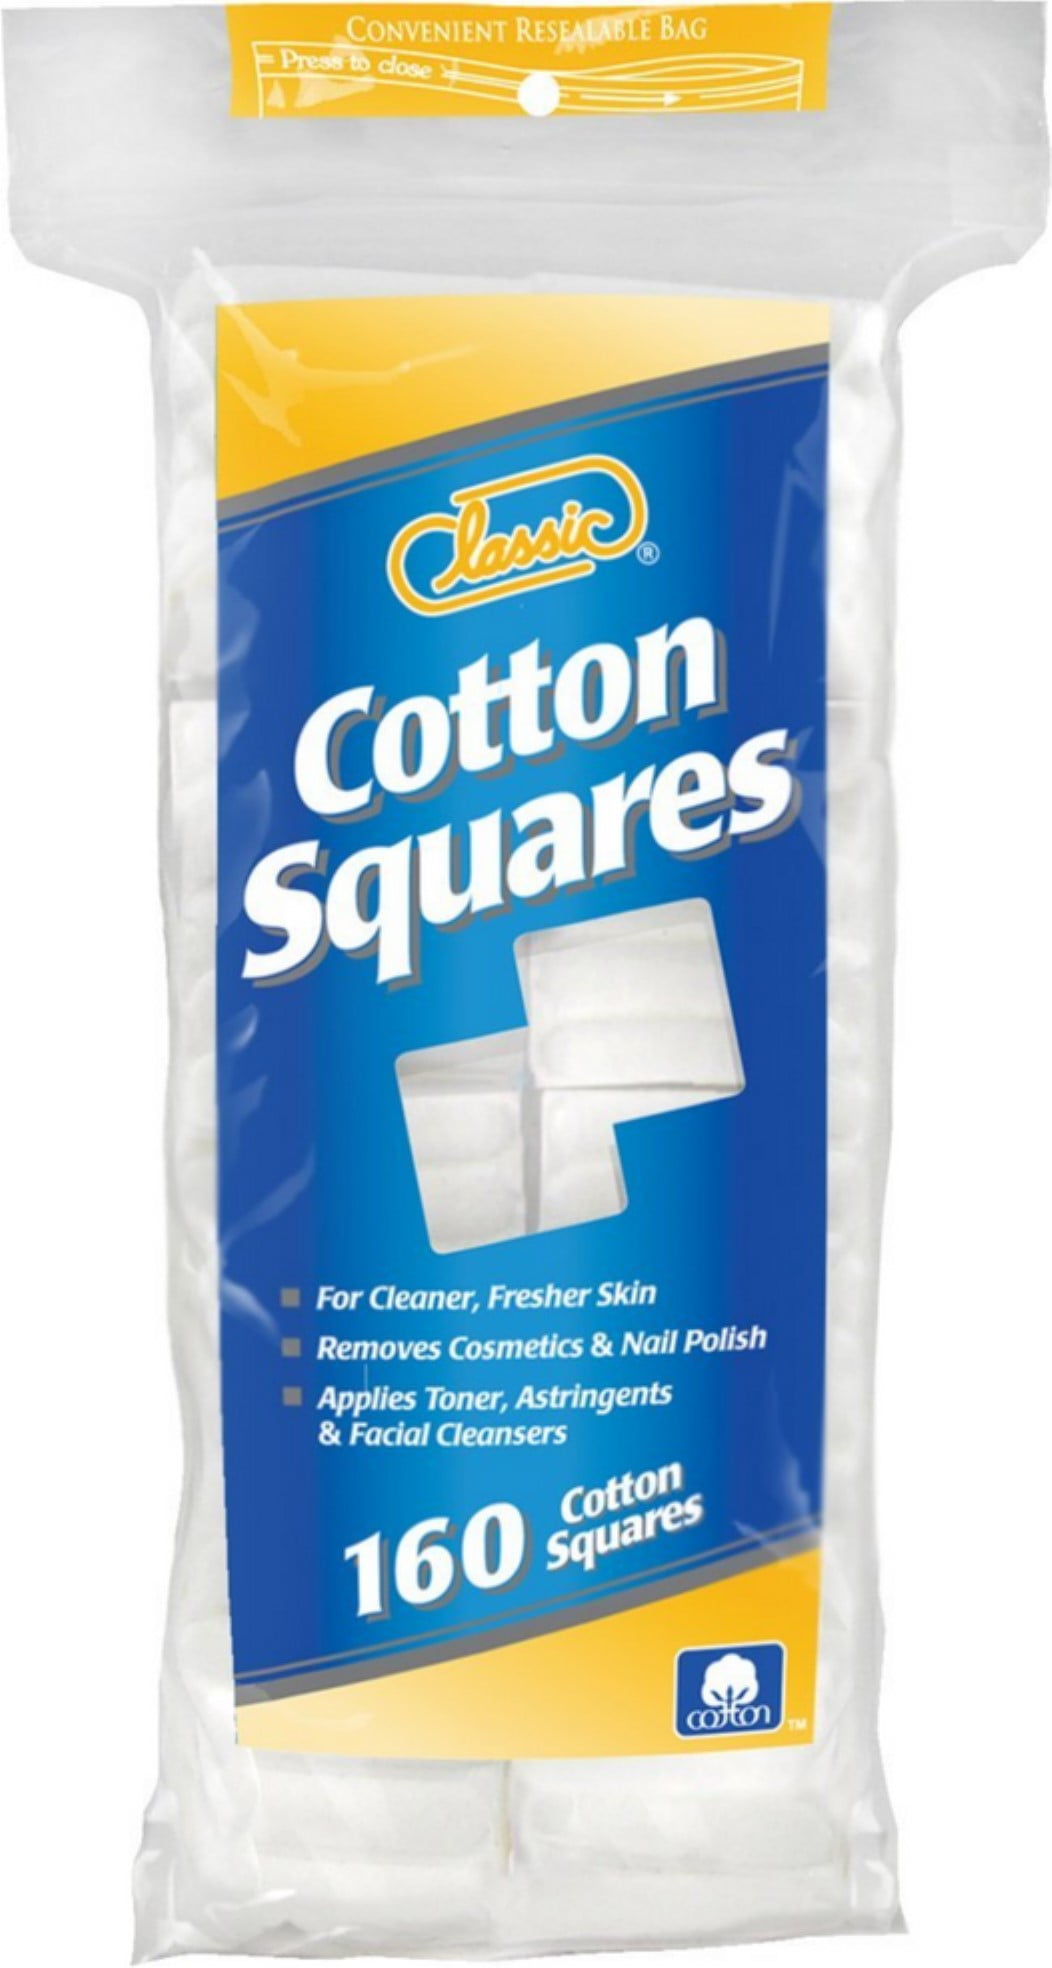 Classic soft and gentle Cotton Squares, 160 Each